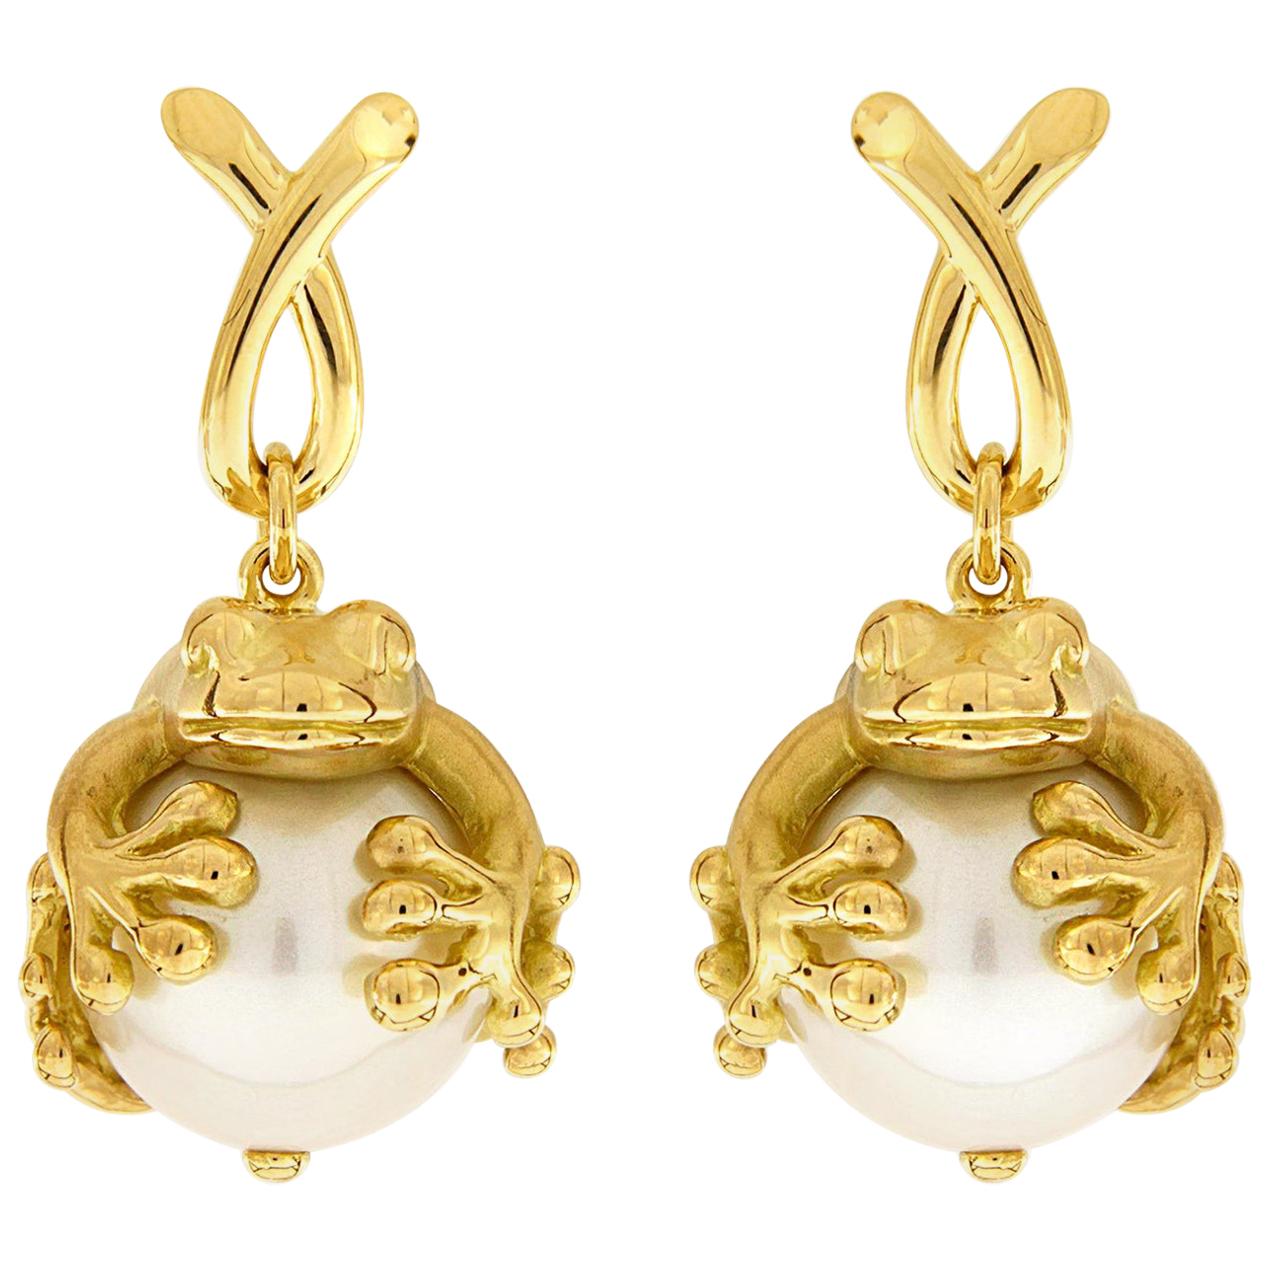 Valentin Magro Frog Grabbing a South Sea Pearl Earrings